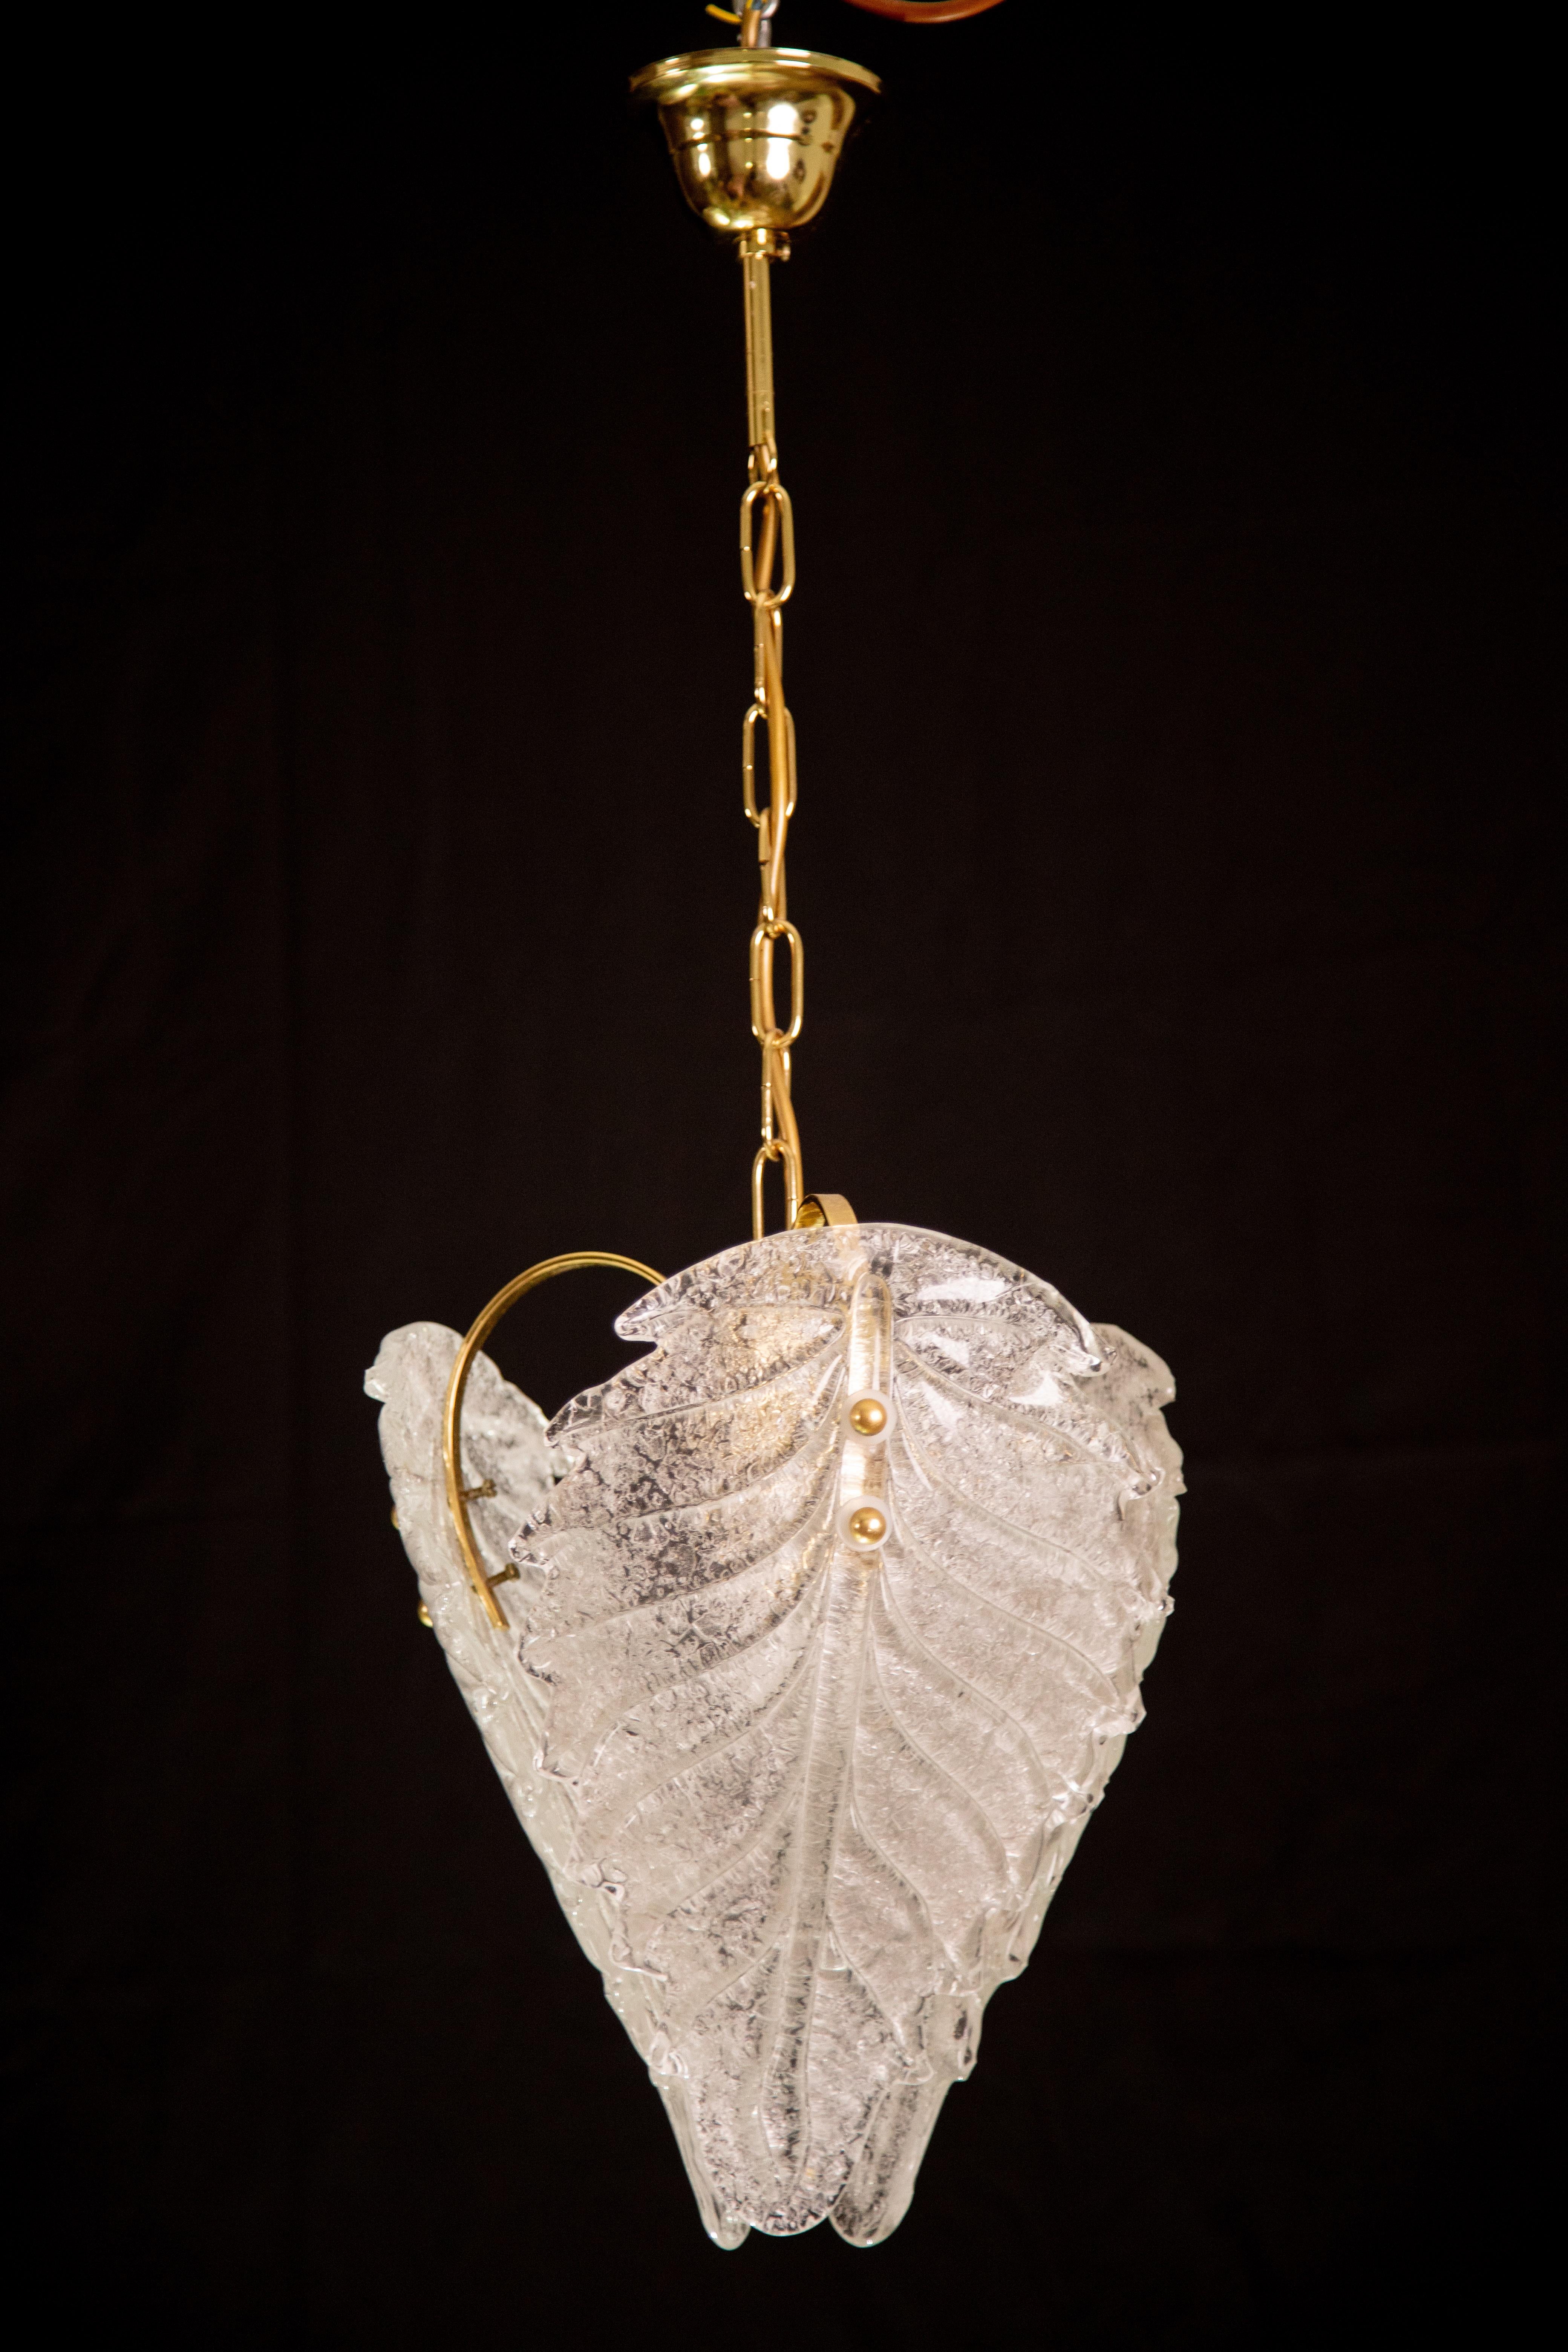 Murano chandelier formed by 3 large leaves

1970s era.

Gold bath frame.

Excellent vintage condition.